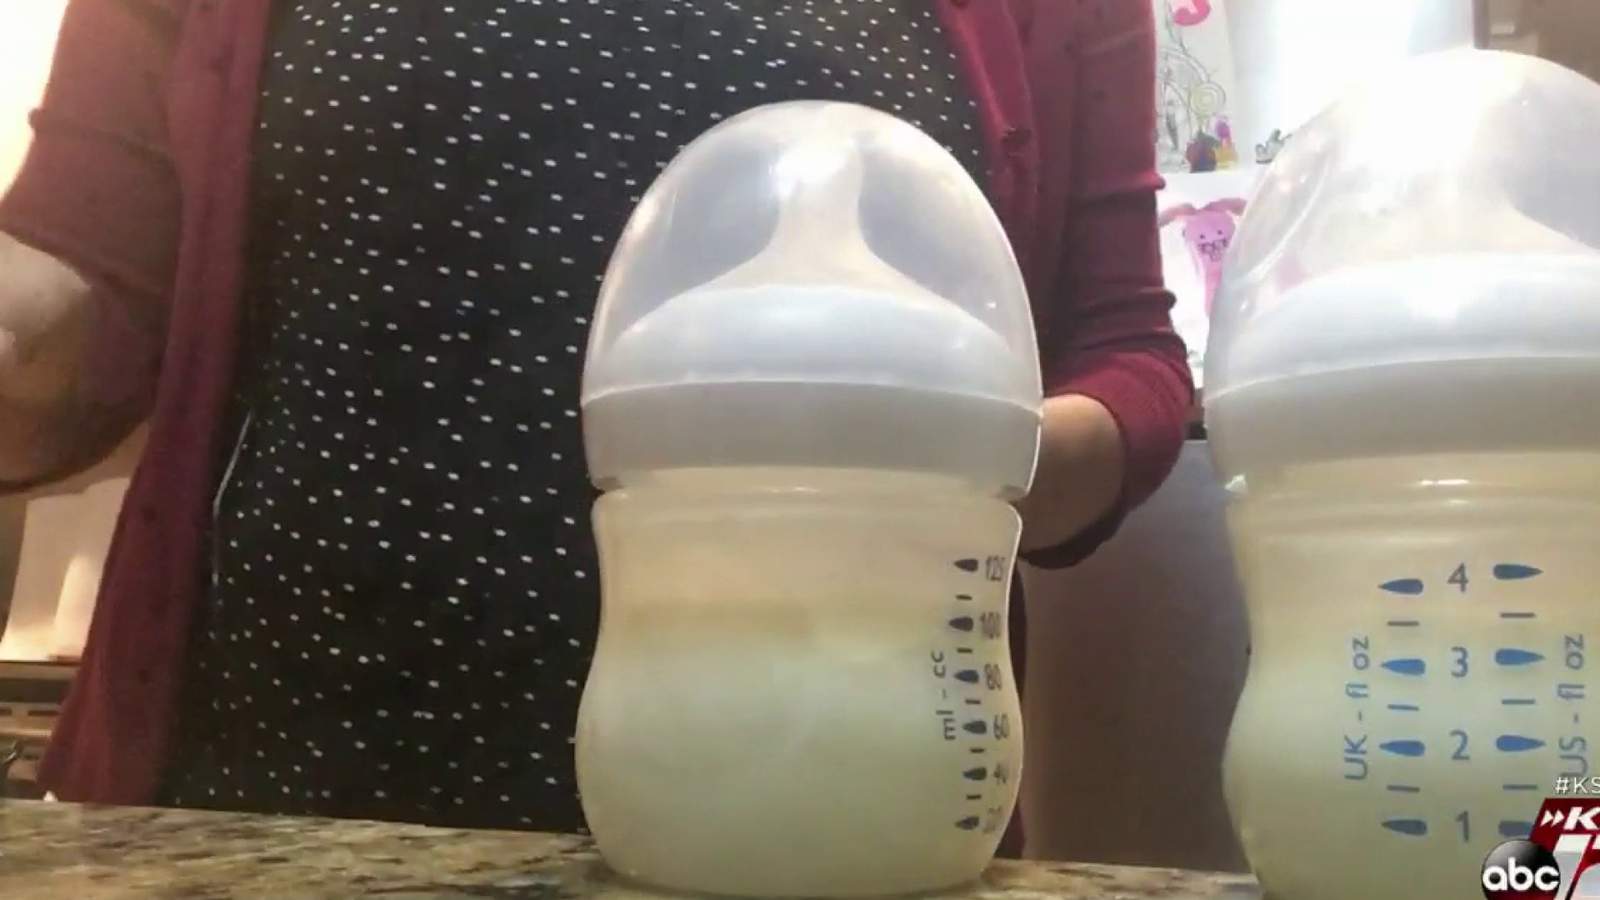 Researchers conducting study to determine whether breast milk can protect babies from COVID-19